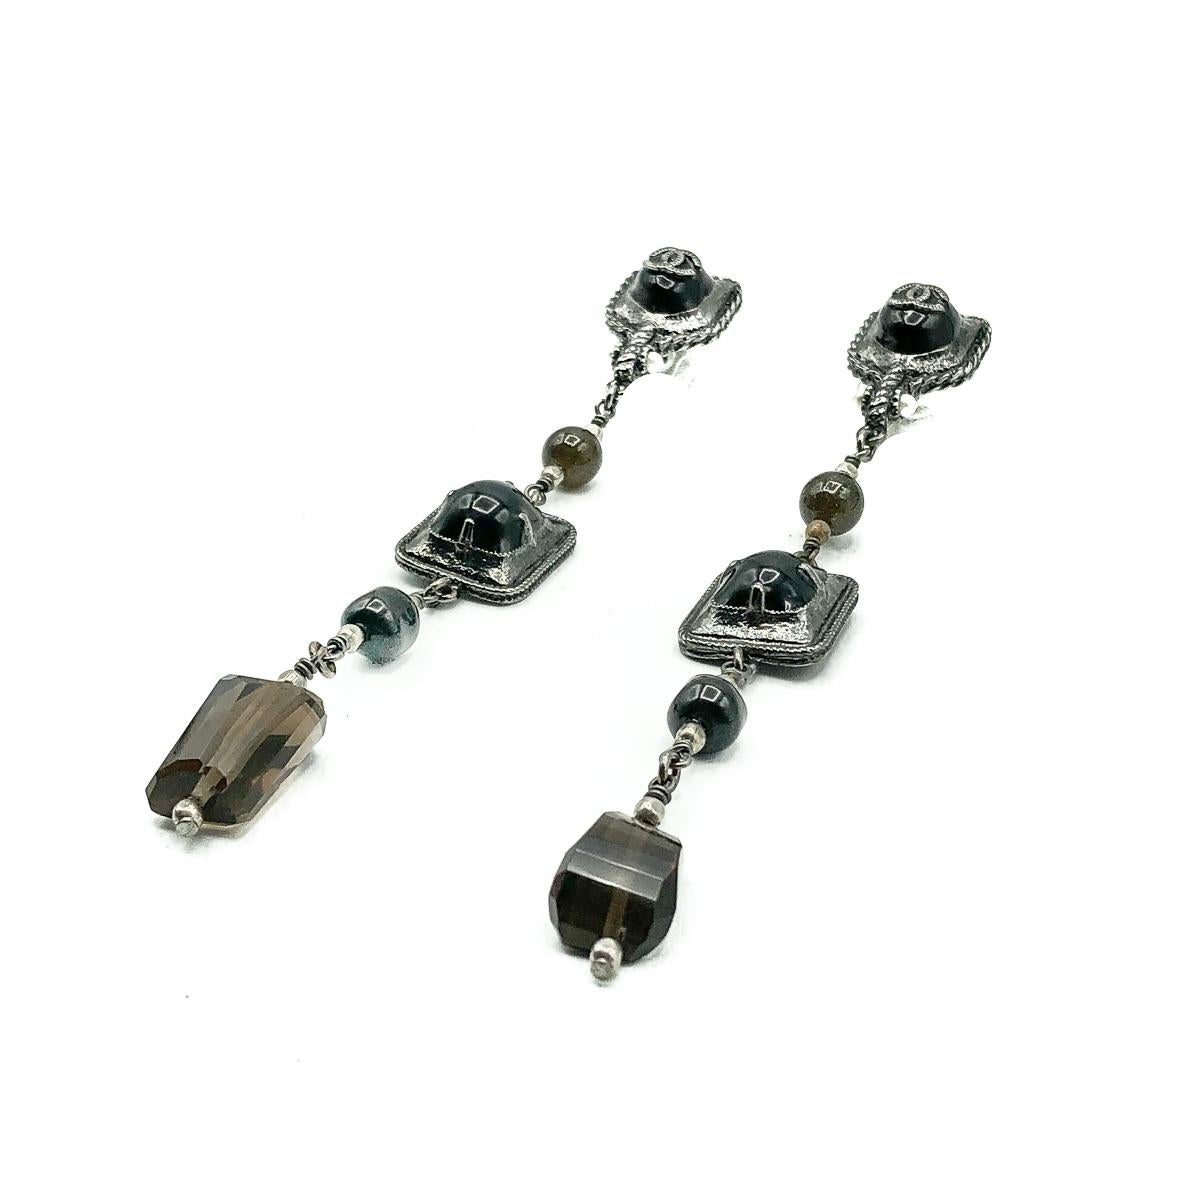 Mesmerizingly long Chanel Gunmetal Drop Earrings. Crafted in grey tone metal and set with resins, gold speckled glass beads, faux seed pearls and faceted glass droplets resembling natural smoky quartz. Finished with the iconic logo on the ear. In